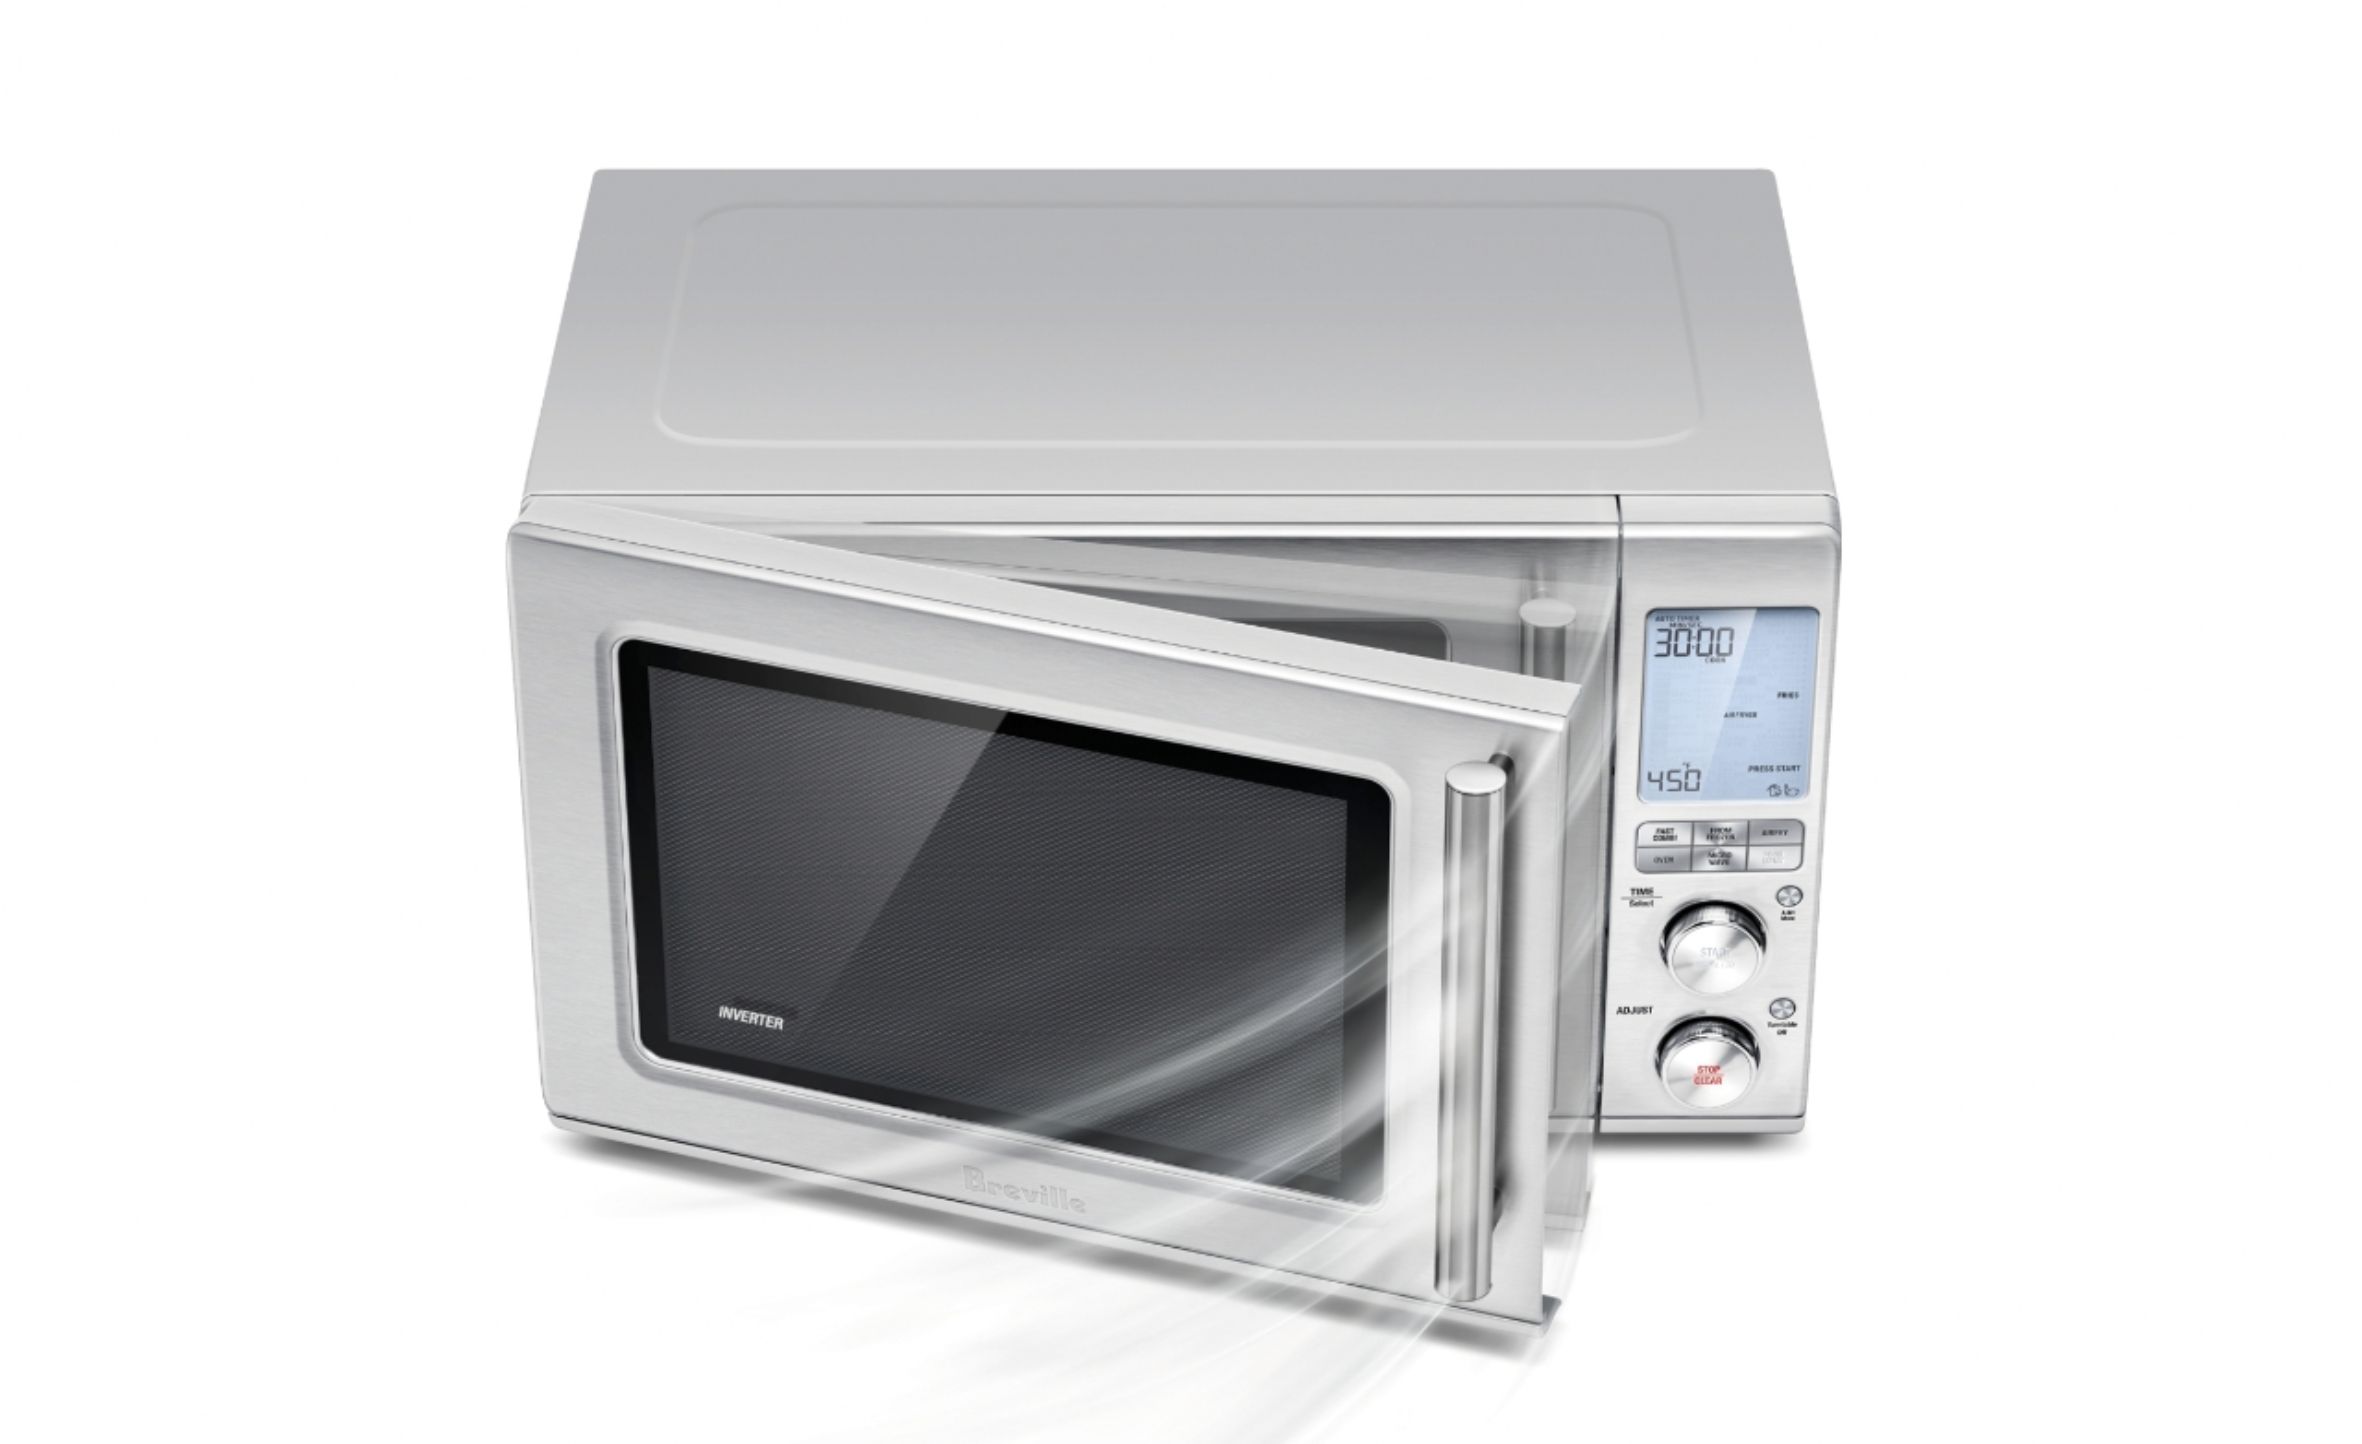 Breville Combi Wave 3-in-1 Convection Microwave review